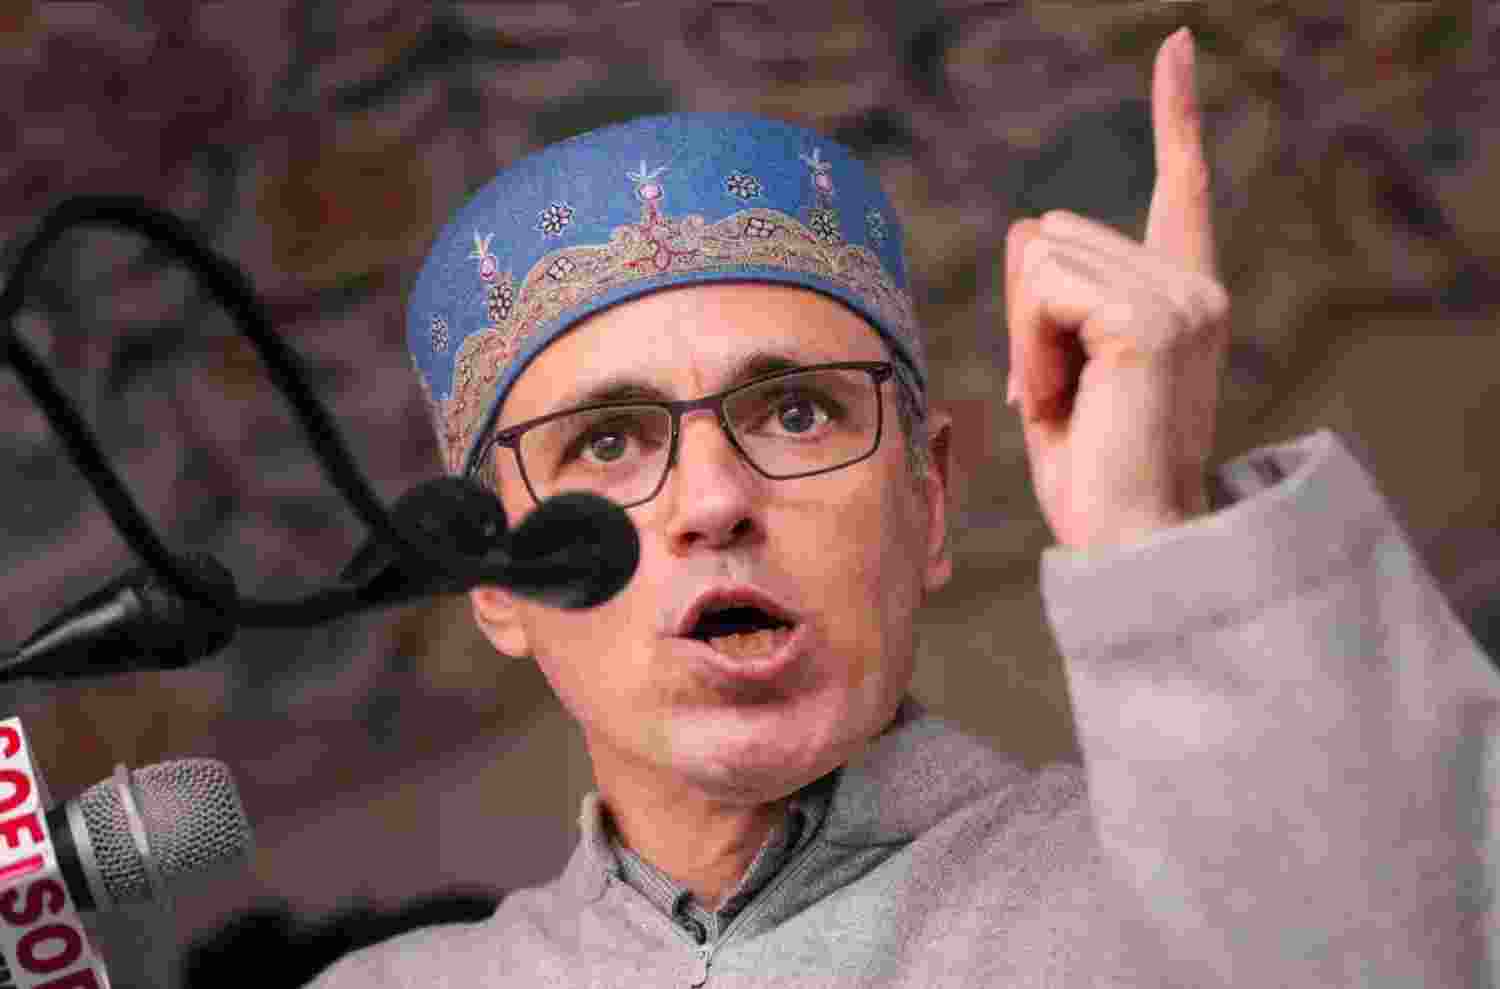 Omar Abdullah fights for Article 370